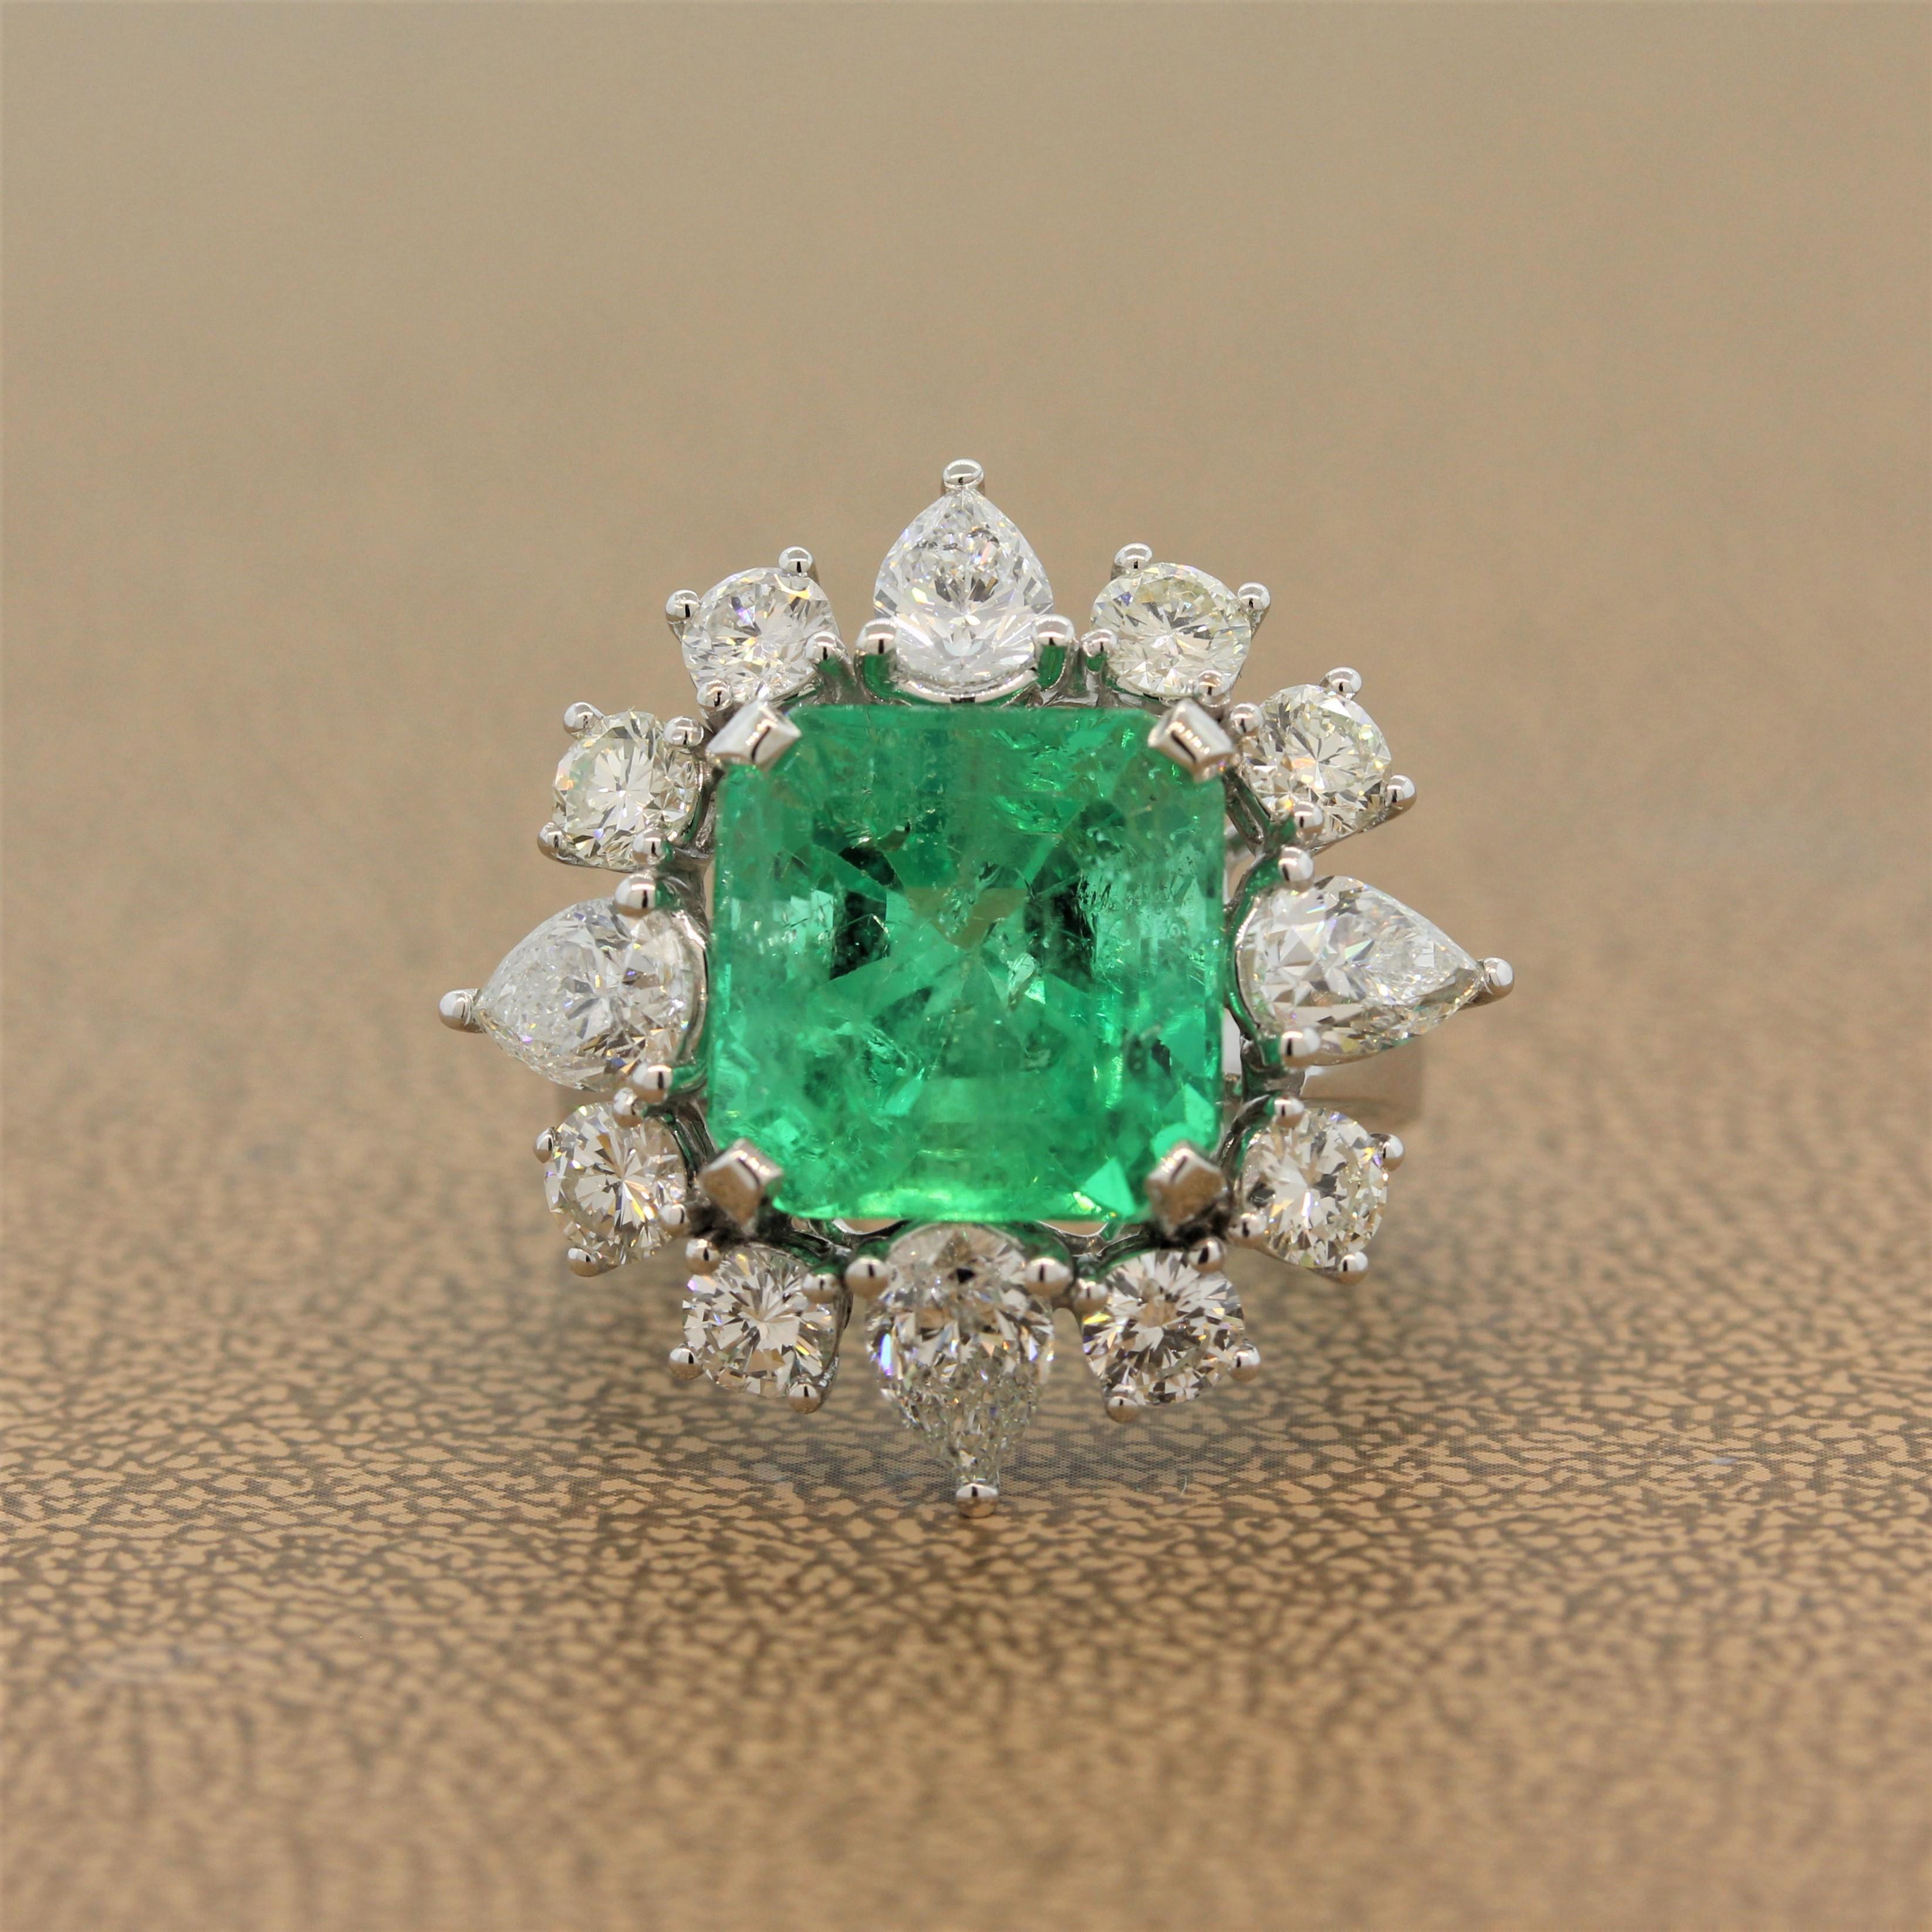 A magnificent emerald ring featuring a 8.14 carat emerald cut emerald with a lush vivid color. The gemstone is haloed by large pear and round cut diamonds totaling 3.45 carats. They are set in a custom made 18K white gold mounting to hold the